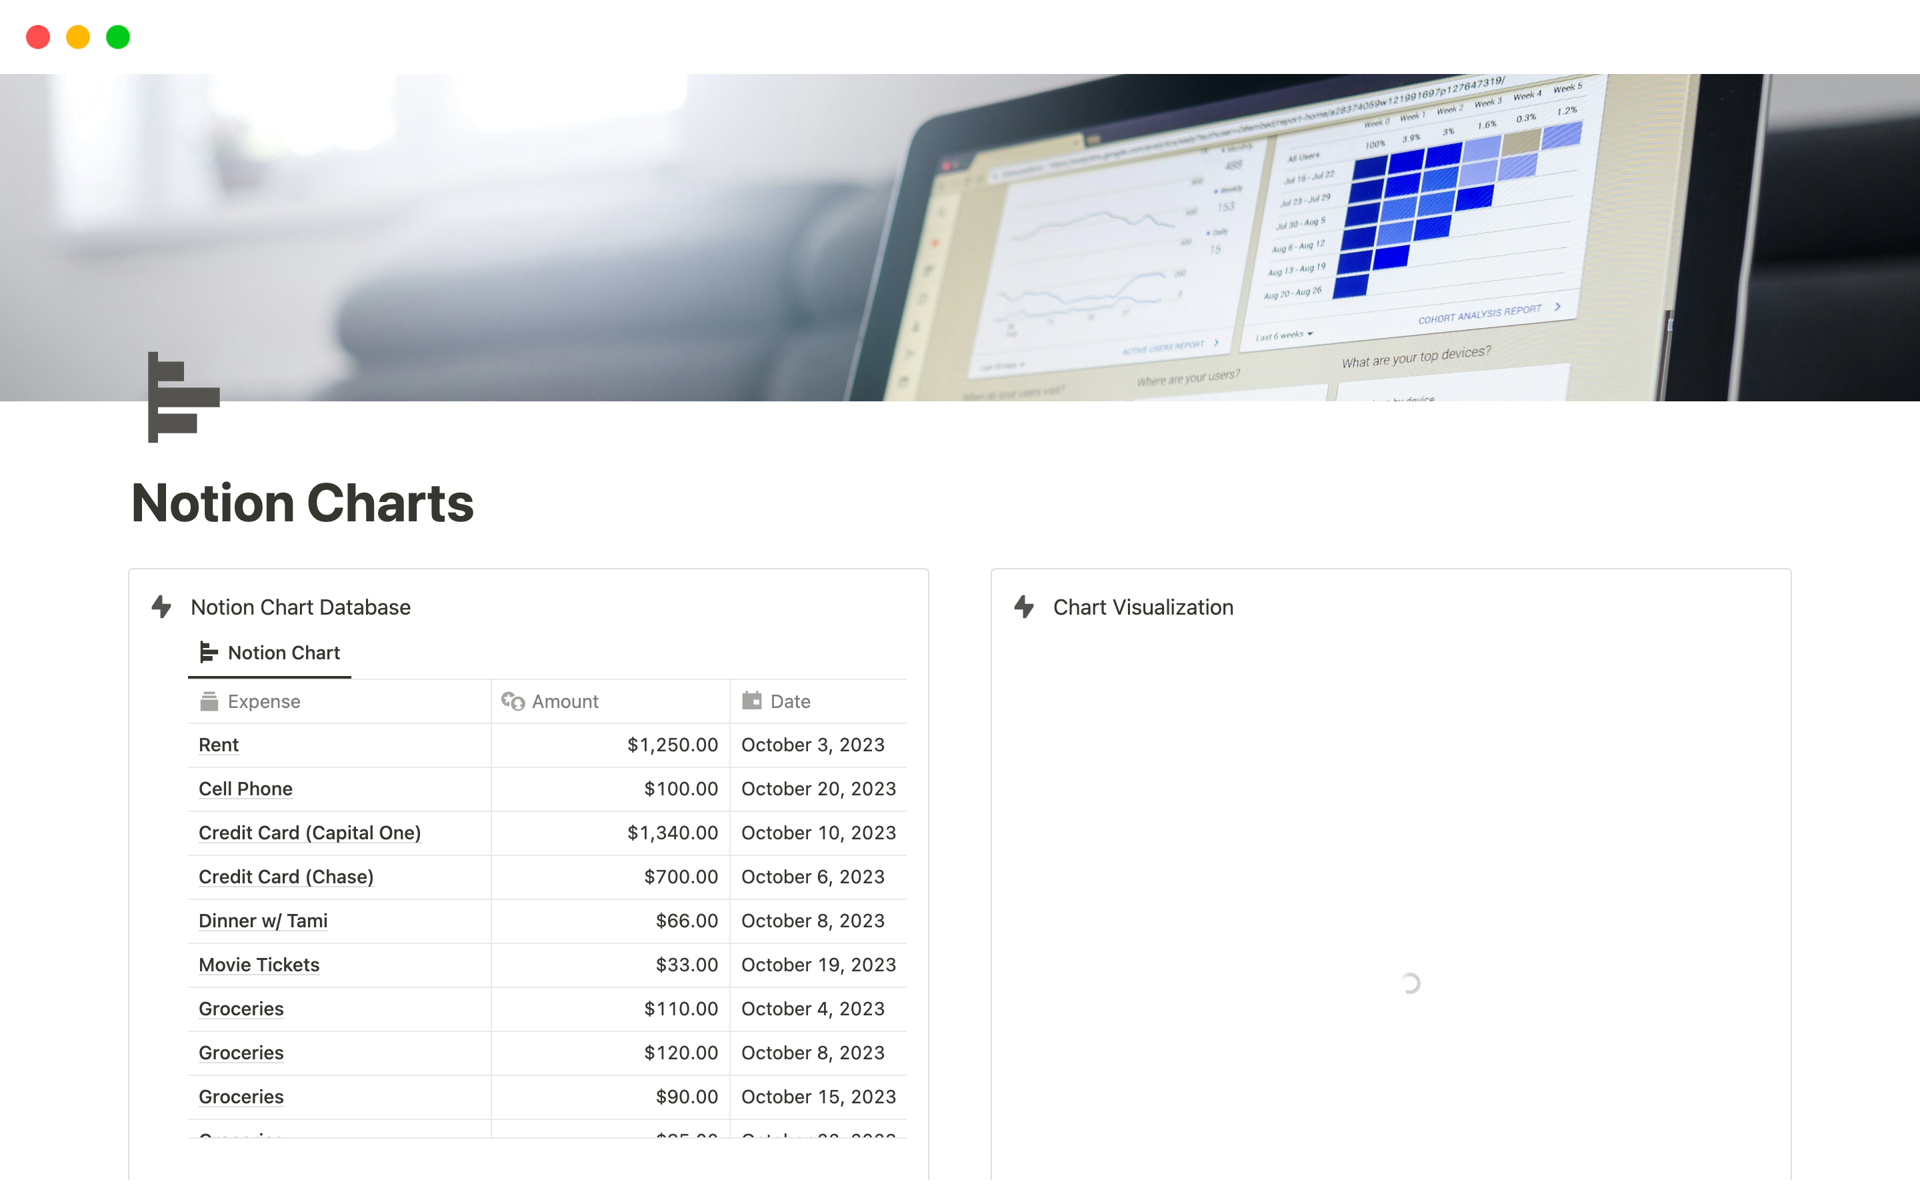 Introducing Notion Charts, the innovative solution for data visualization within Notion. 